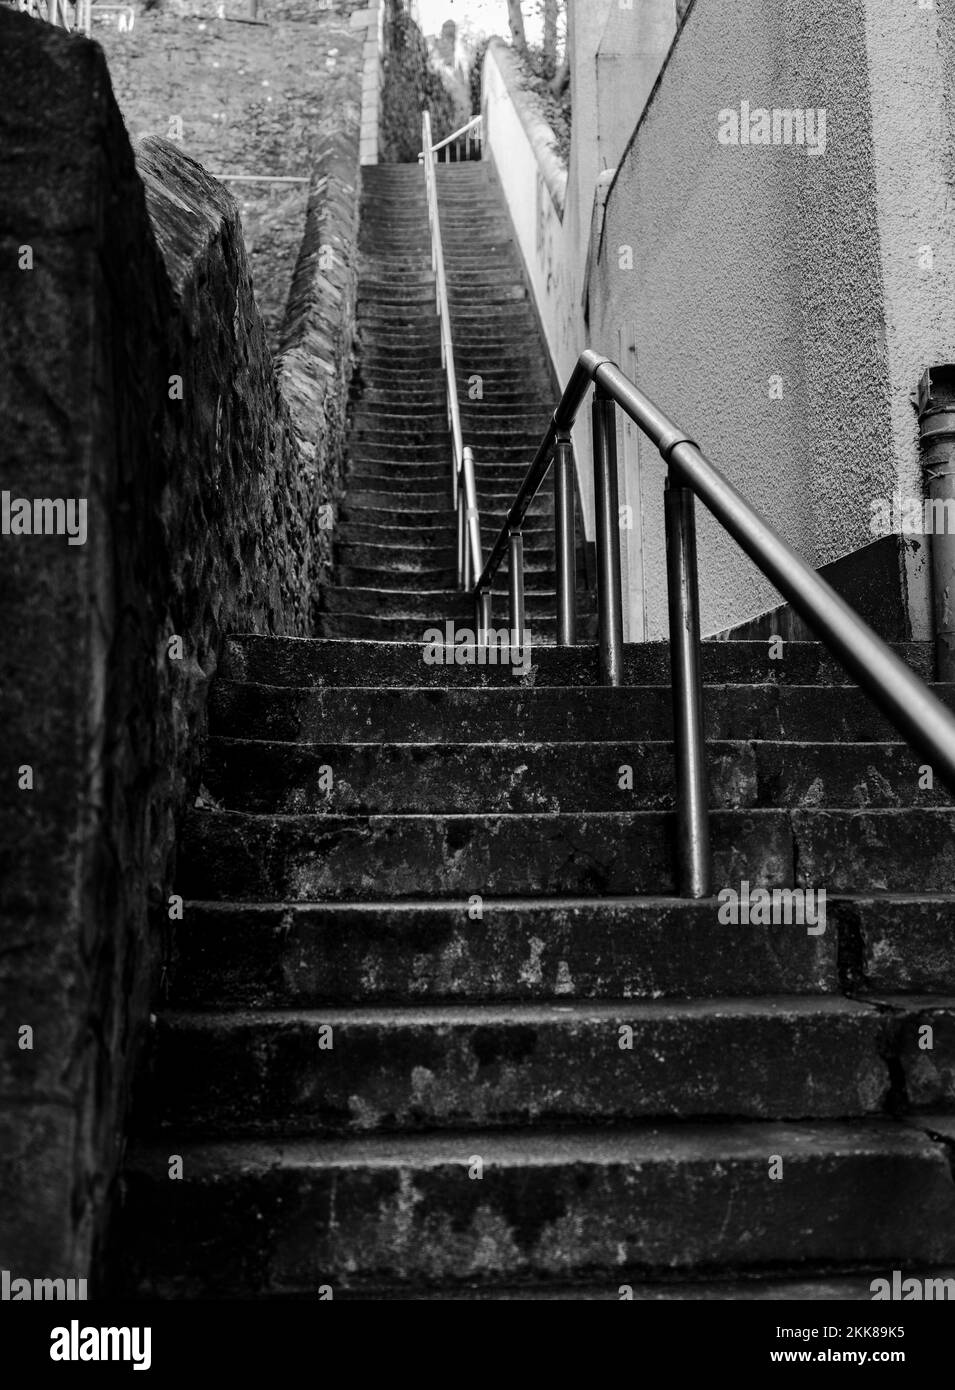 Falmouth alley ways and steps.  Exploring the lanes of Falmouth town. Street photography Stock Photo